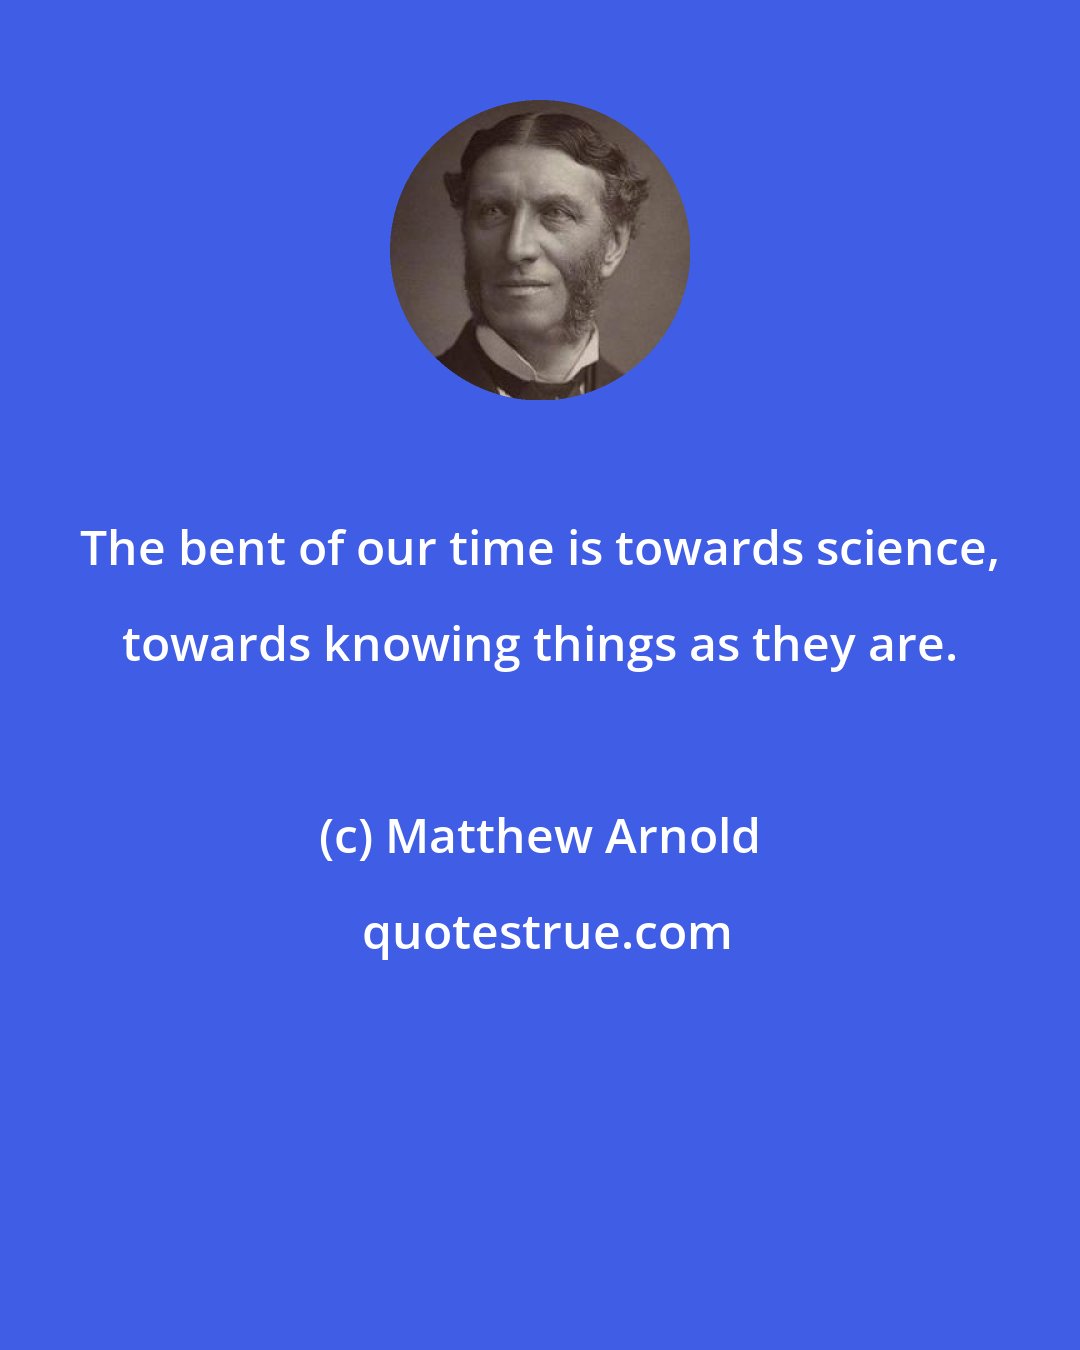 Matthew Arnold: The bent of our time is towards science, towards knowing things as they are.